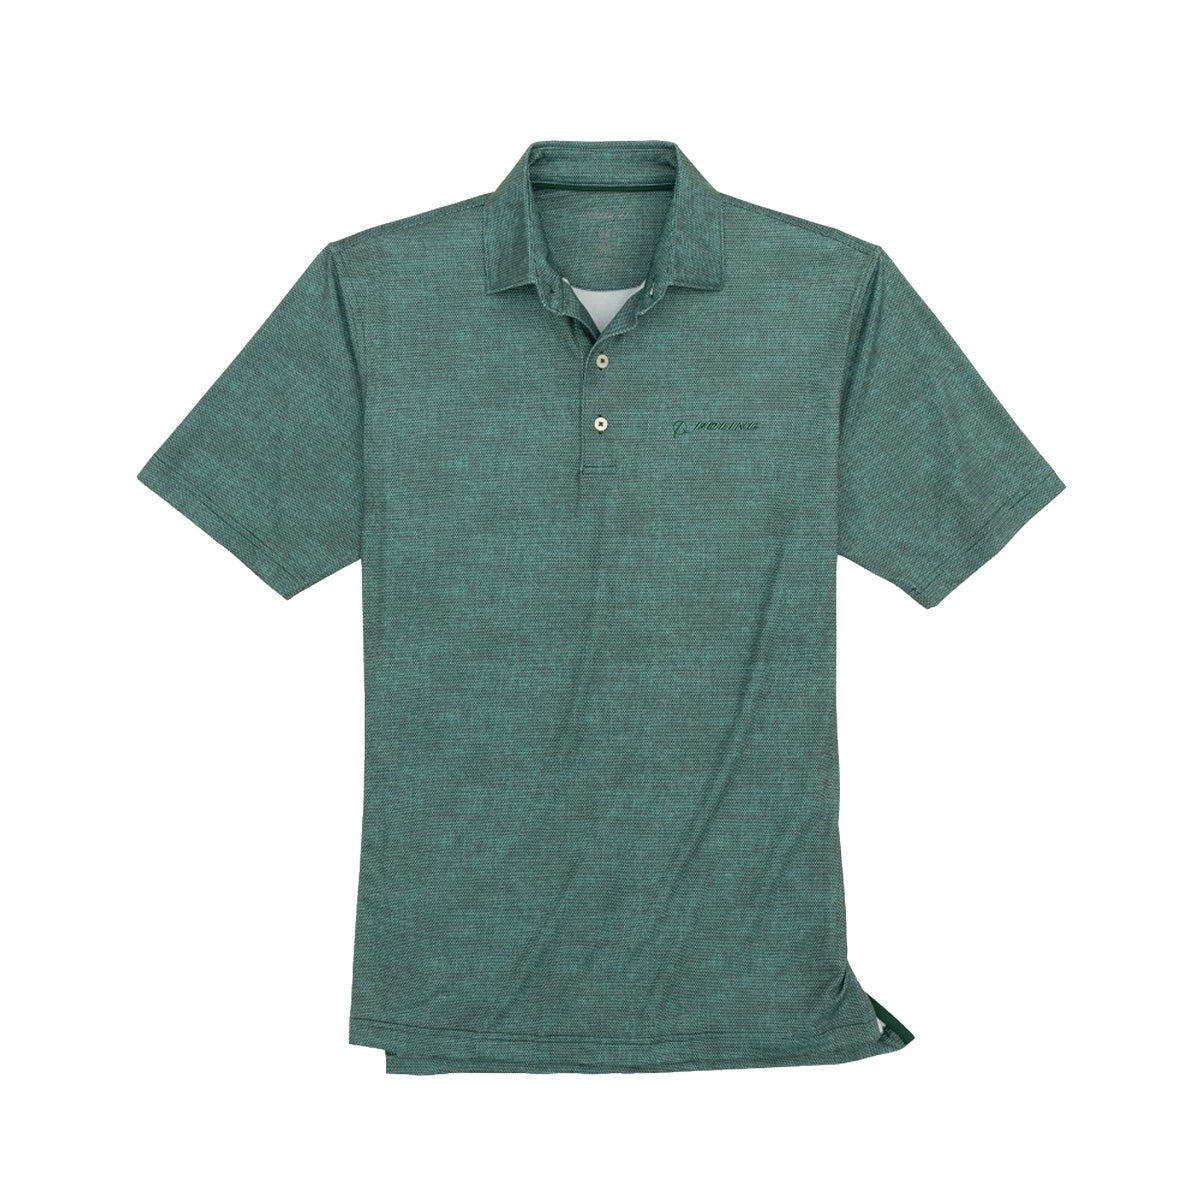 Full product image of the polo in a green color.  Green Boeing signature logo on left chest.  Featuring 3 buttons.